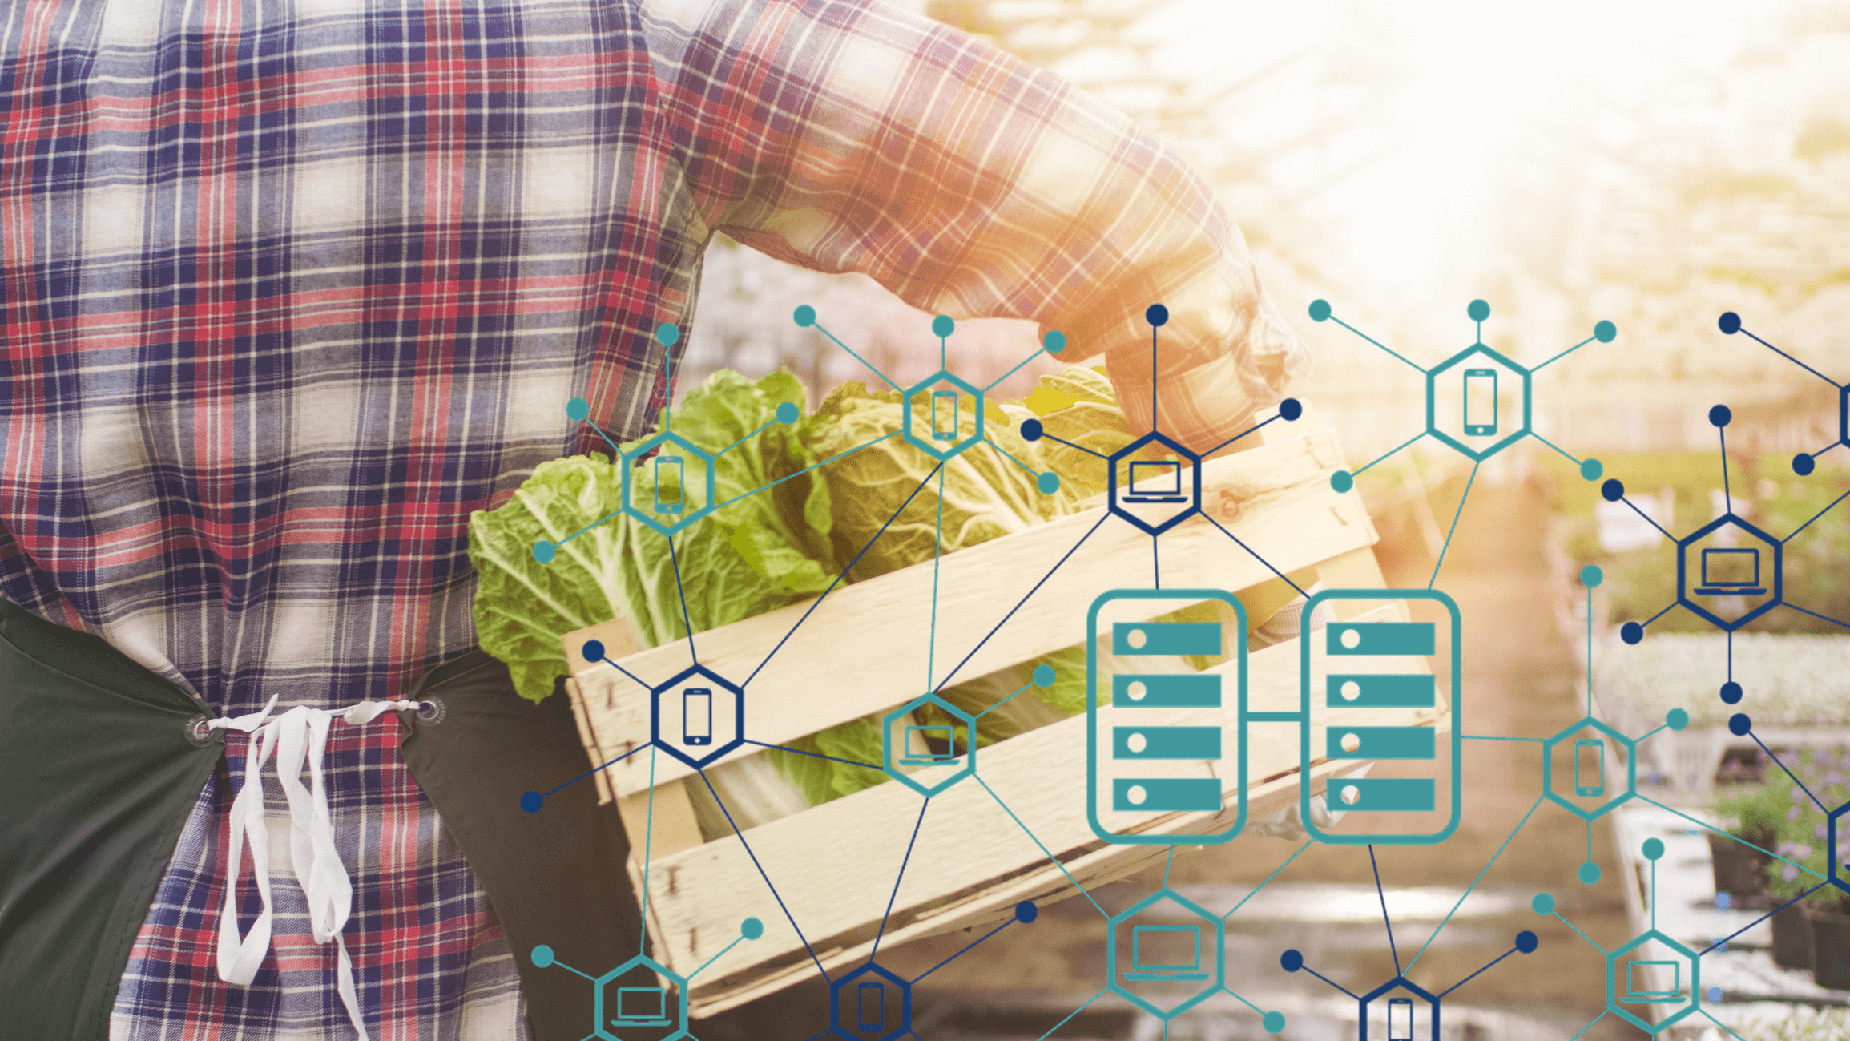 Walmart is mandating that their produce suppliers adopt blockchain technologies by January 31, 2019